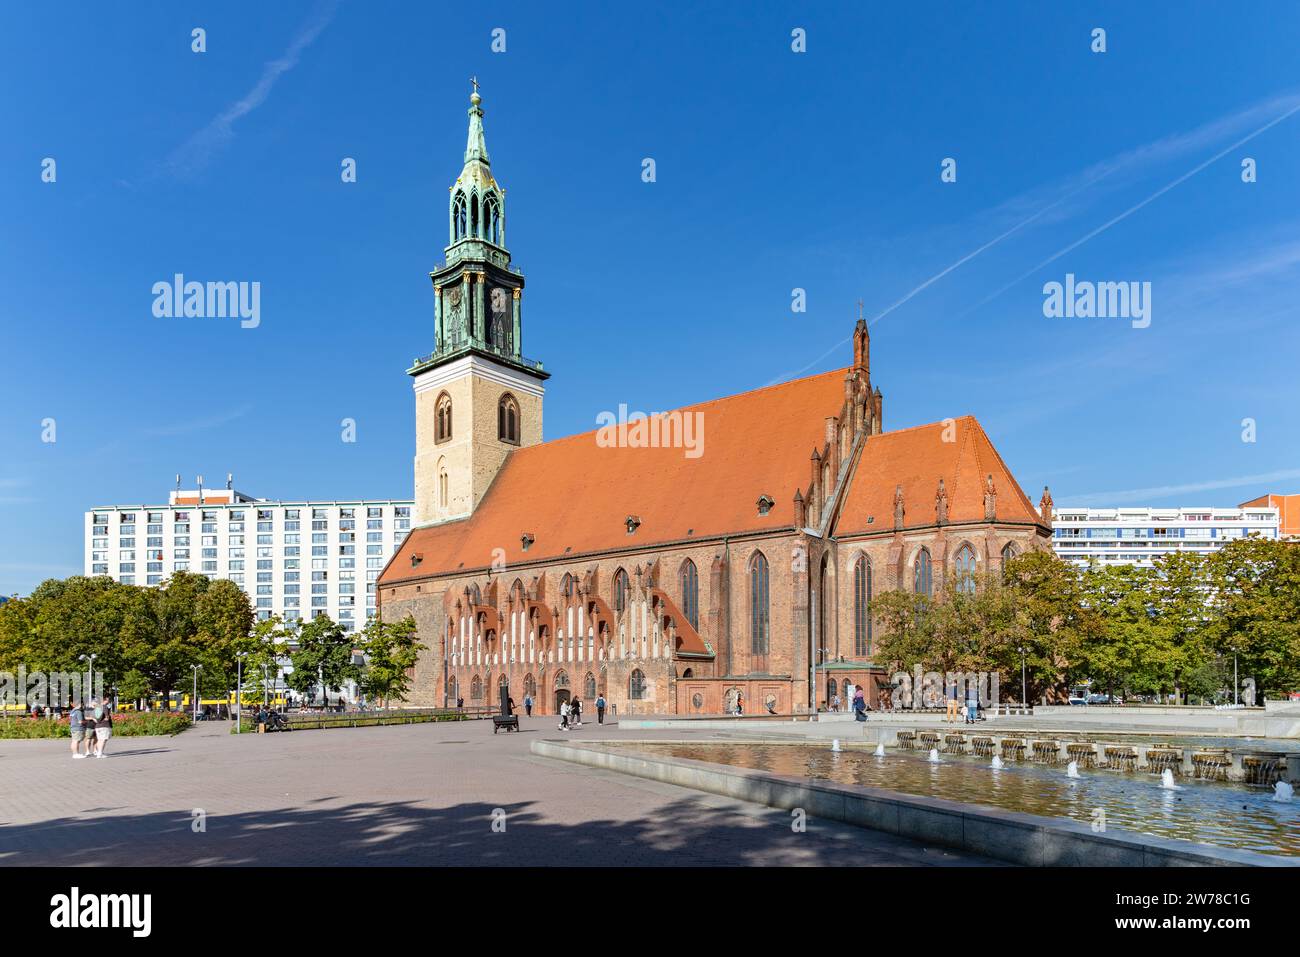 A picture of the St. Mary's Church in Berlin. Stock Photo